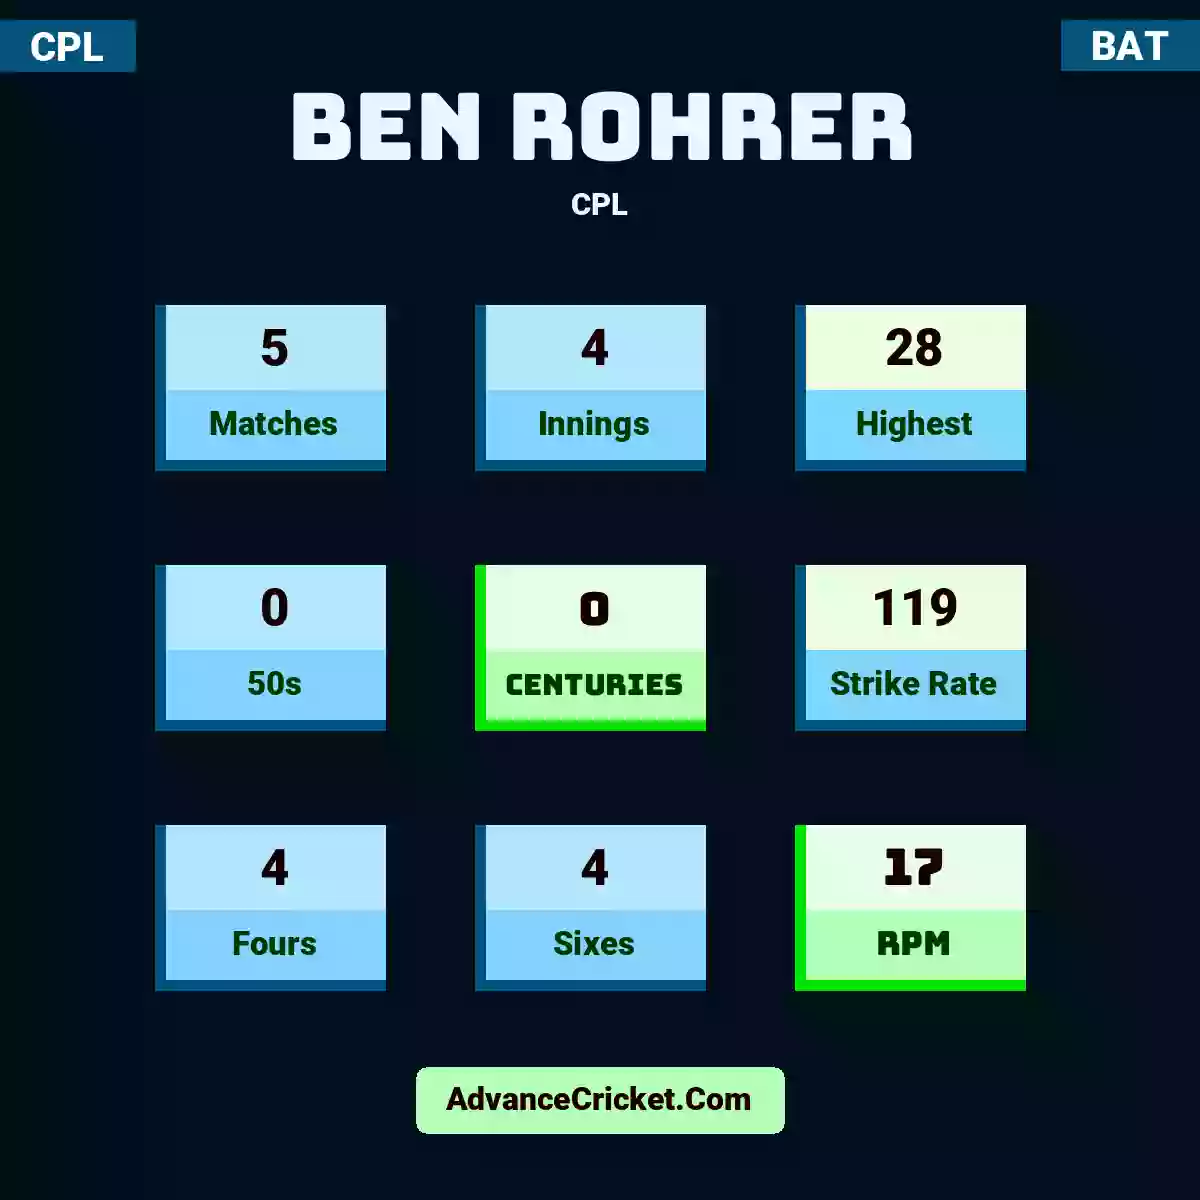 Ben Rohrer CPL , Ben Rohrer played 5 matches, scored 28 runs as highest, 0 half-centuries, and 0 centuries, with a strike rate of 119. B.Rohrer hit 4 fours and 4 sixes, with an RPM of 17.